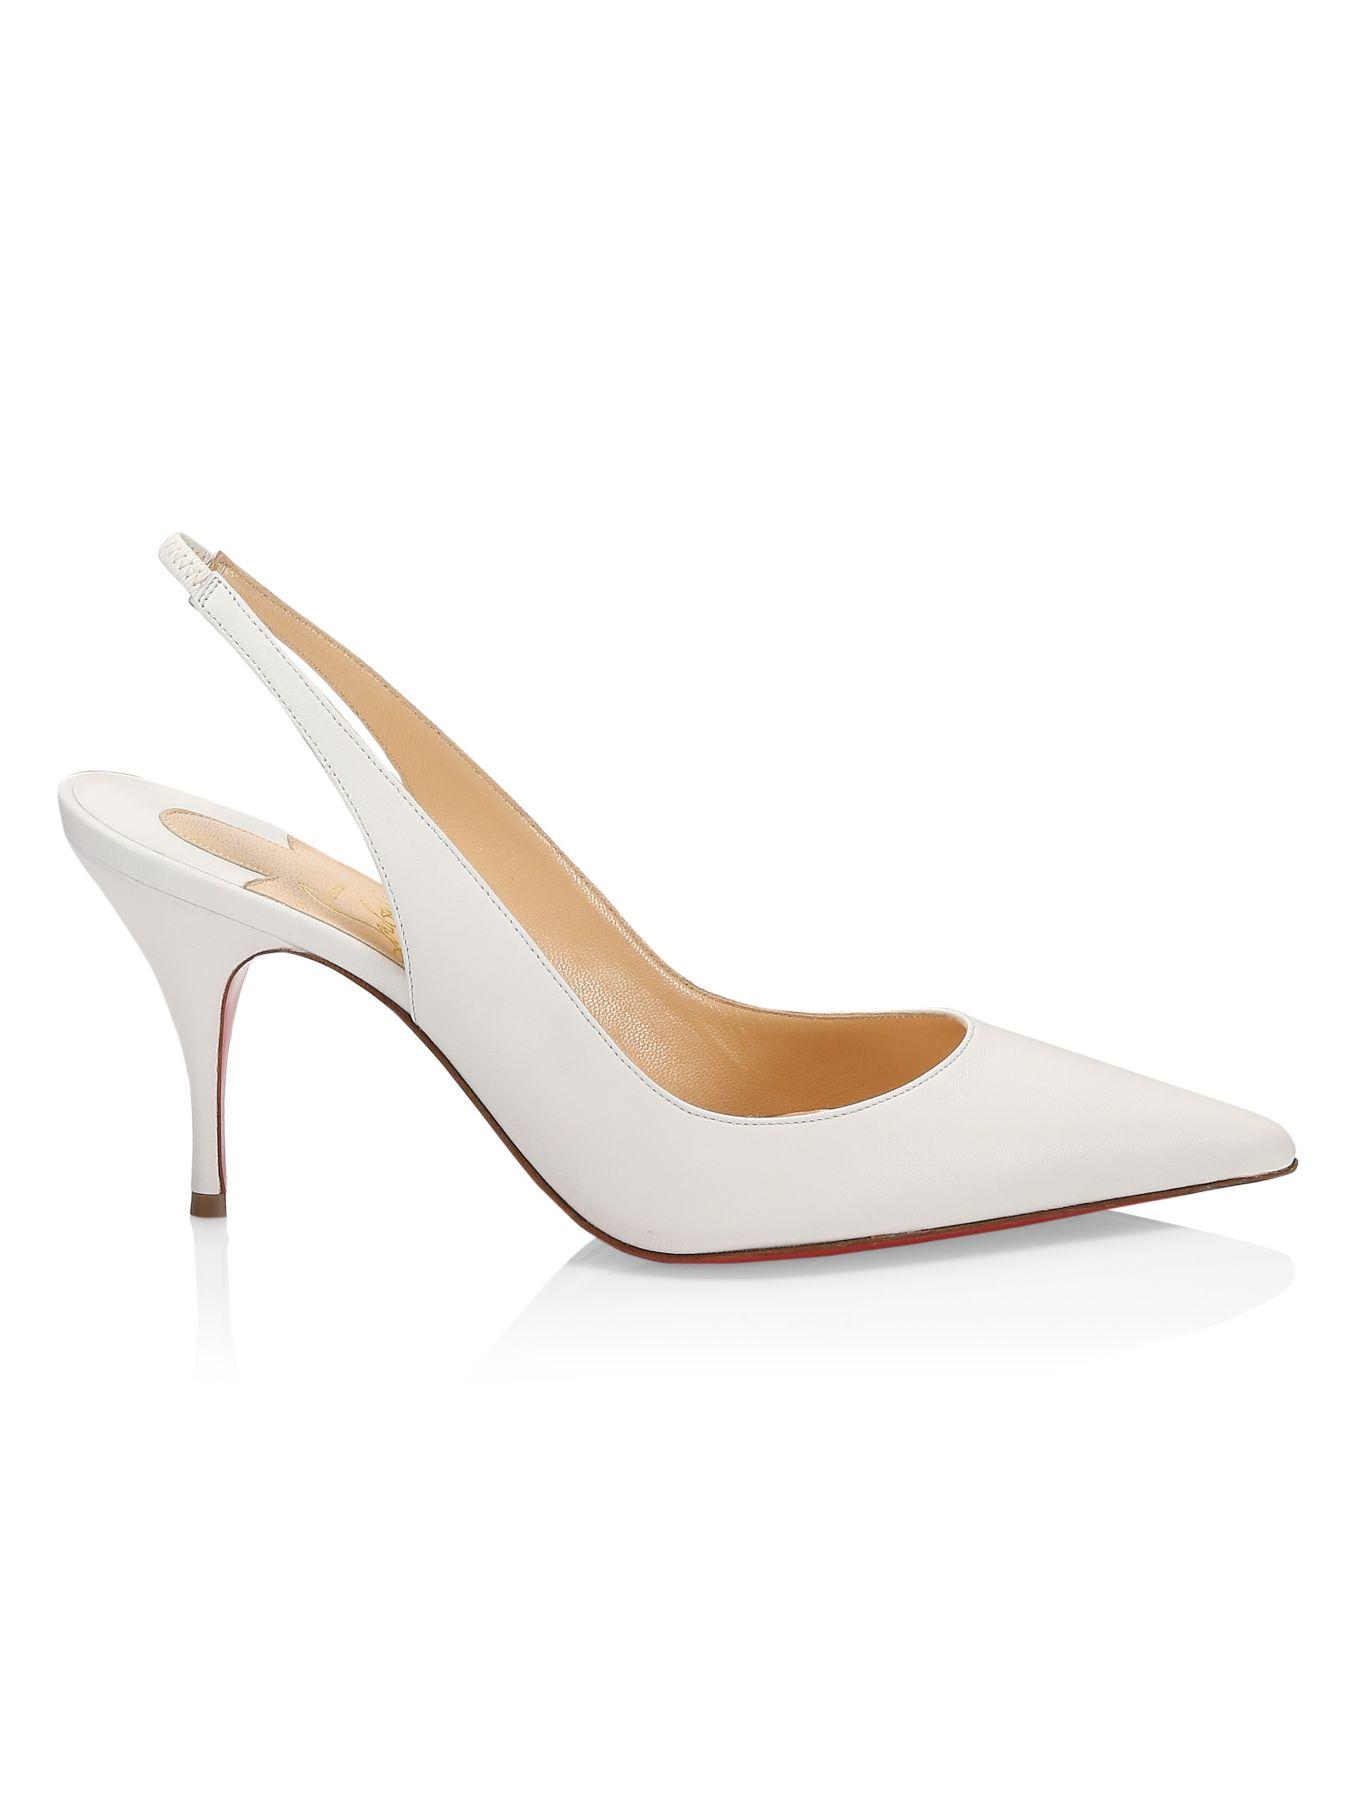 Christian Louboutin Clare Leather Slingback Pumps in White - Lyst